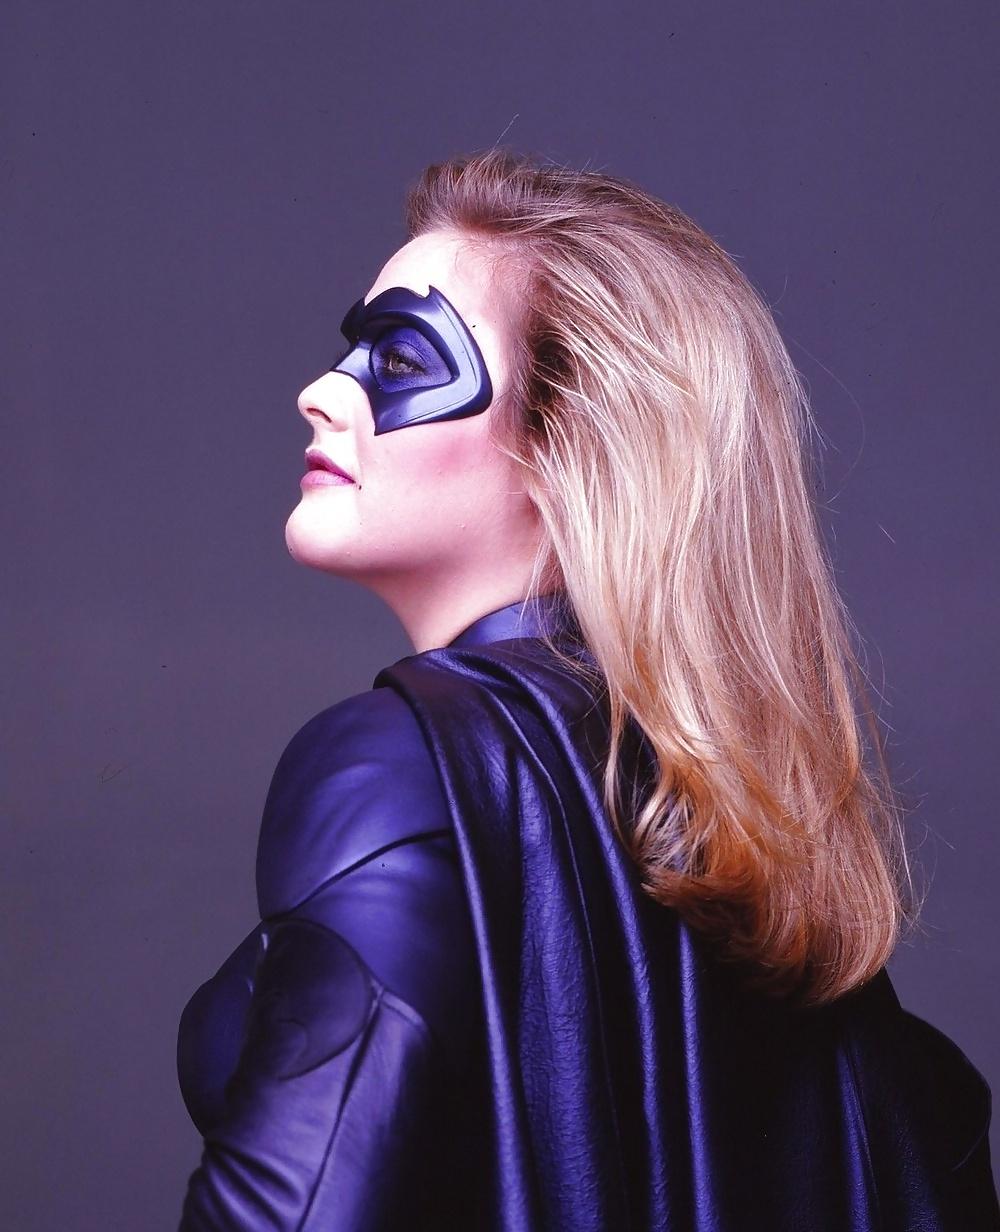 65+ Hot Pictures Of Alicia Silverstone – The Forgotten Batgirl In Batman & Robin | Best Of Comic Books